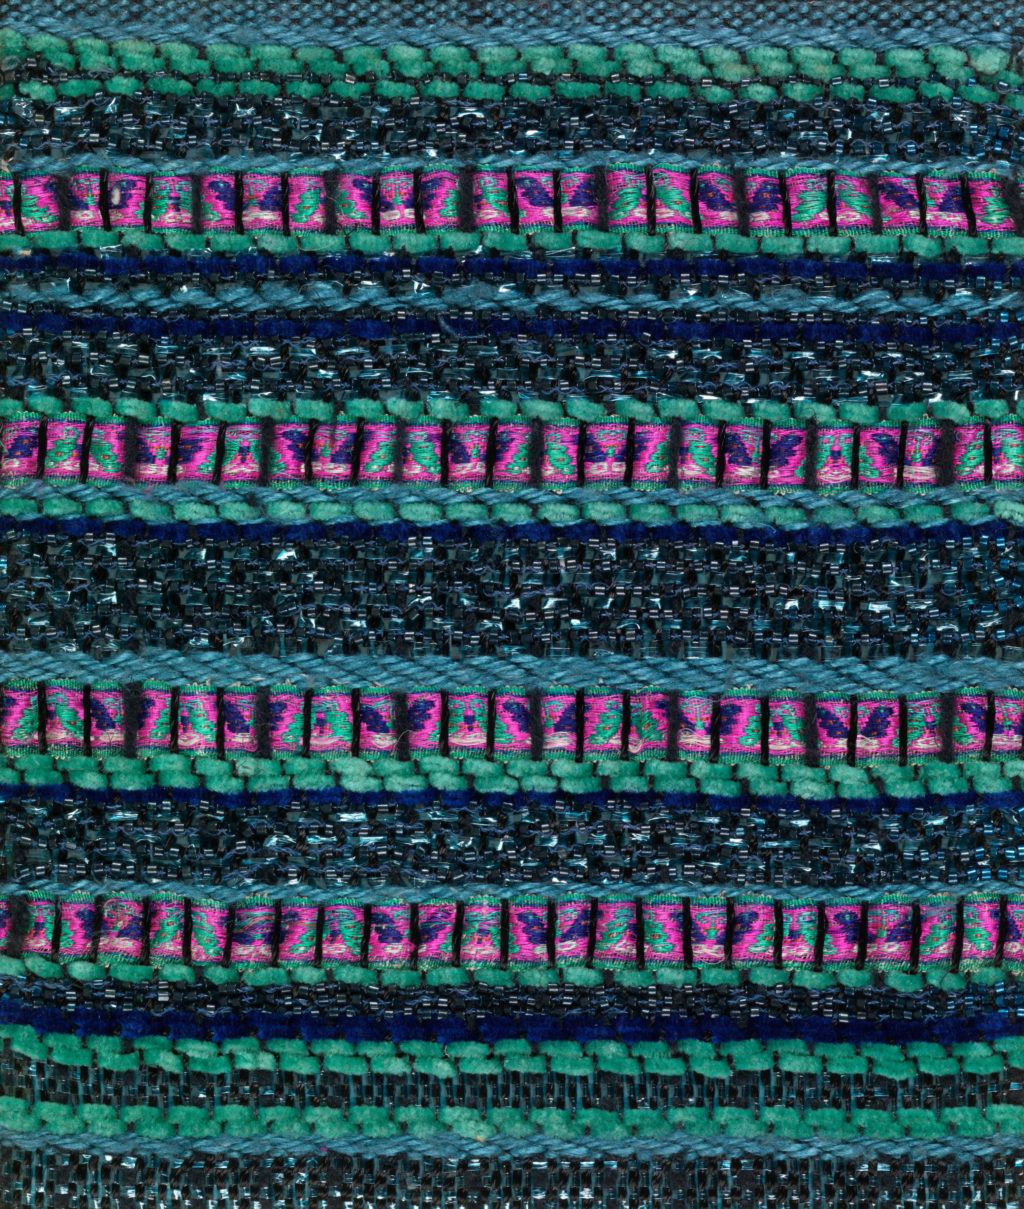 A close-up of textured, woven fabric in vibrant, glimmering blues and pinks.